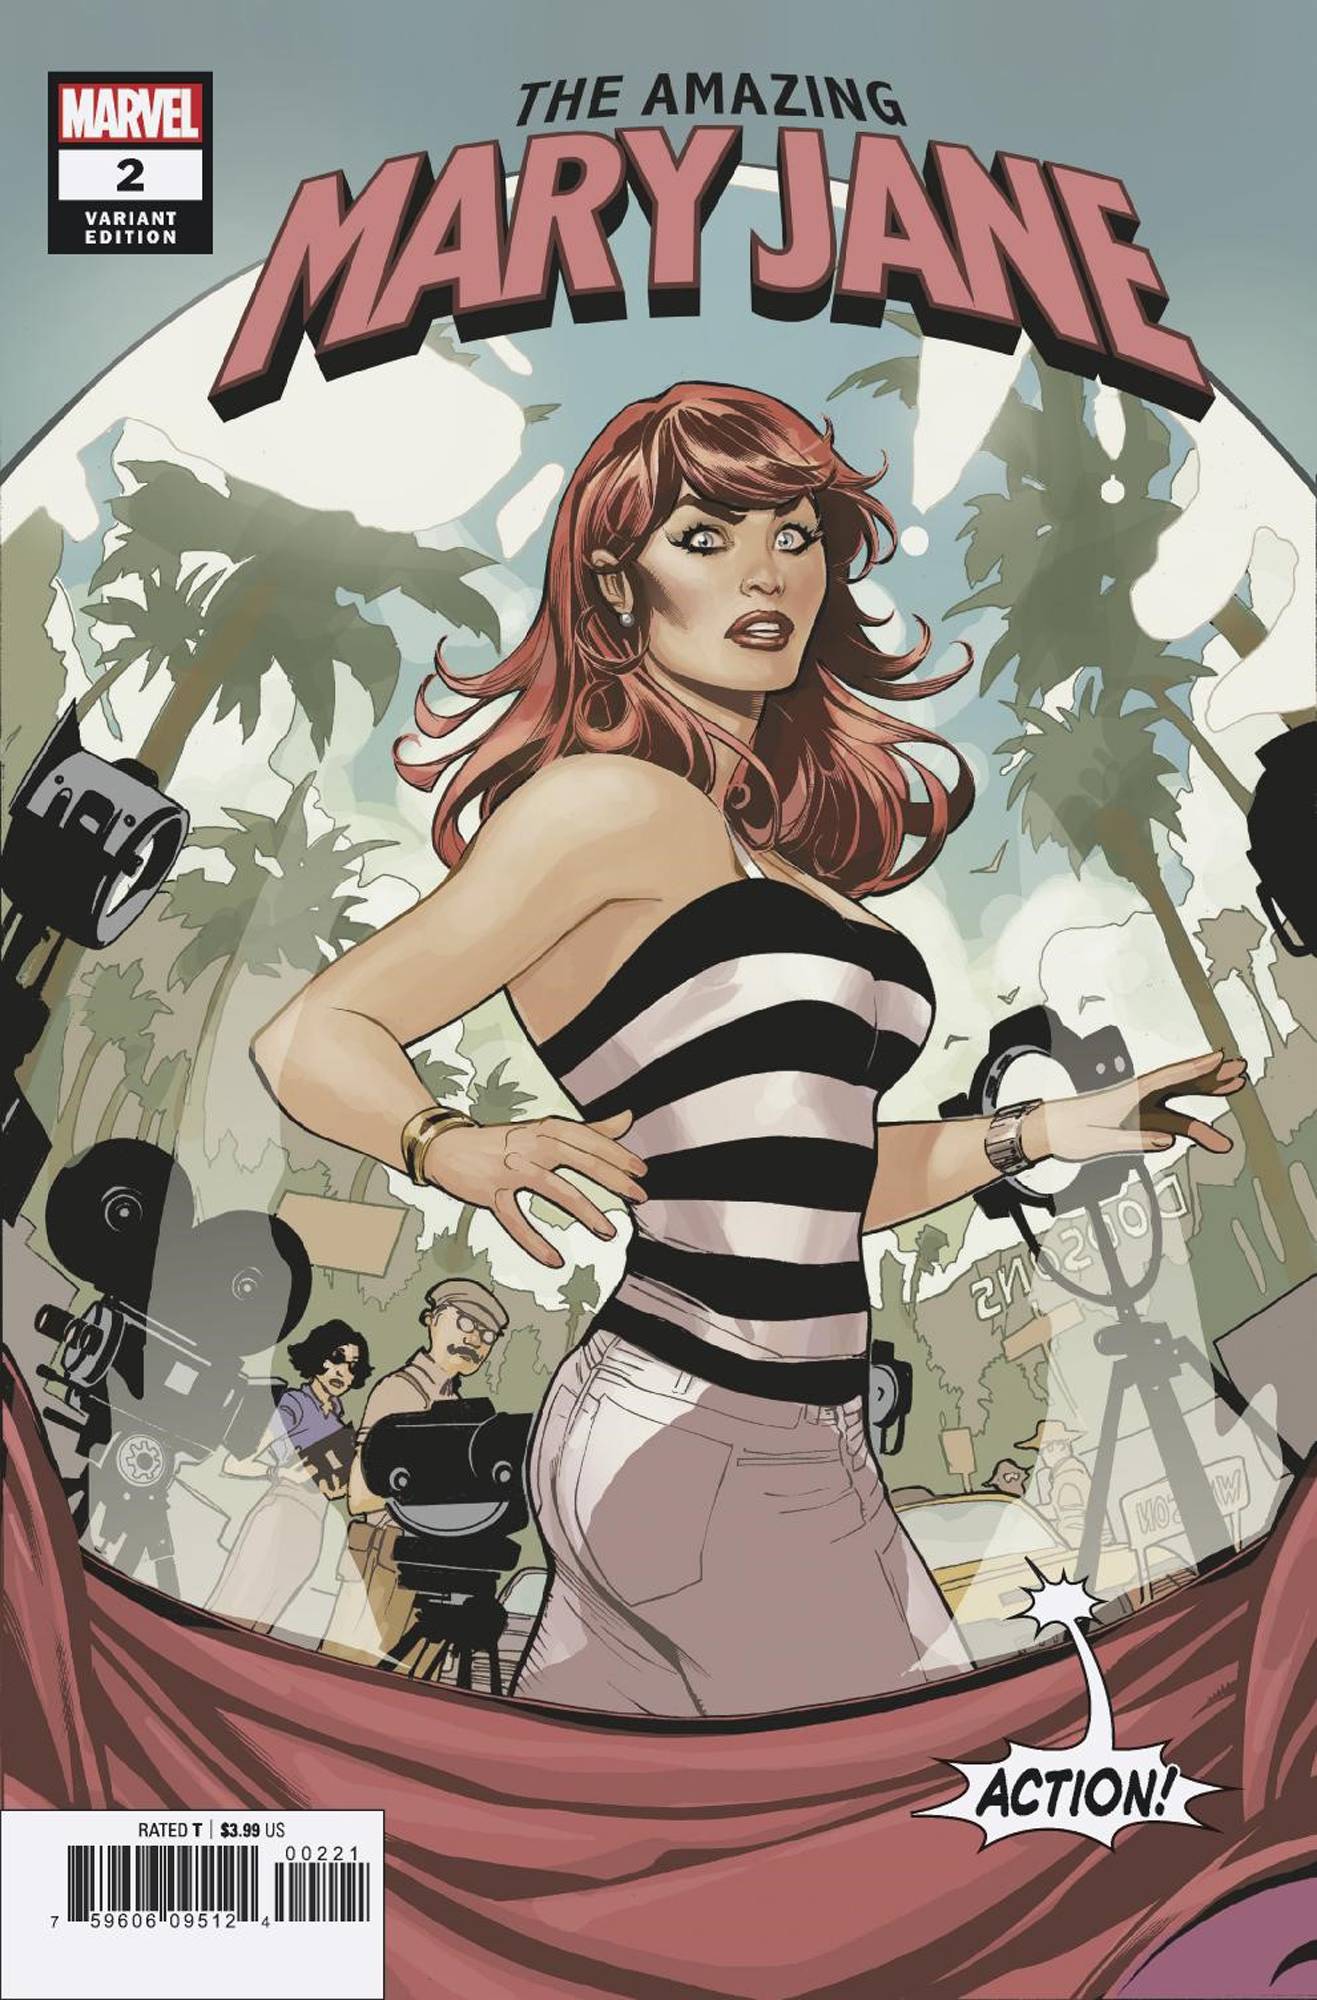 Trouble On Set: Preview The Amazing Mary Jane #4 From Williams